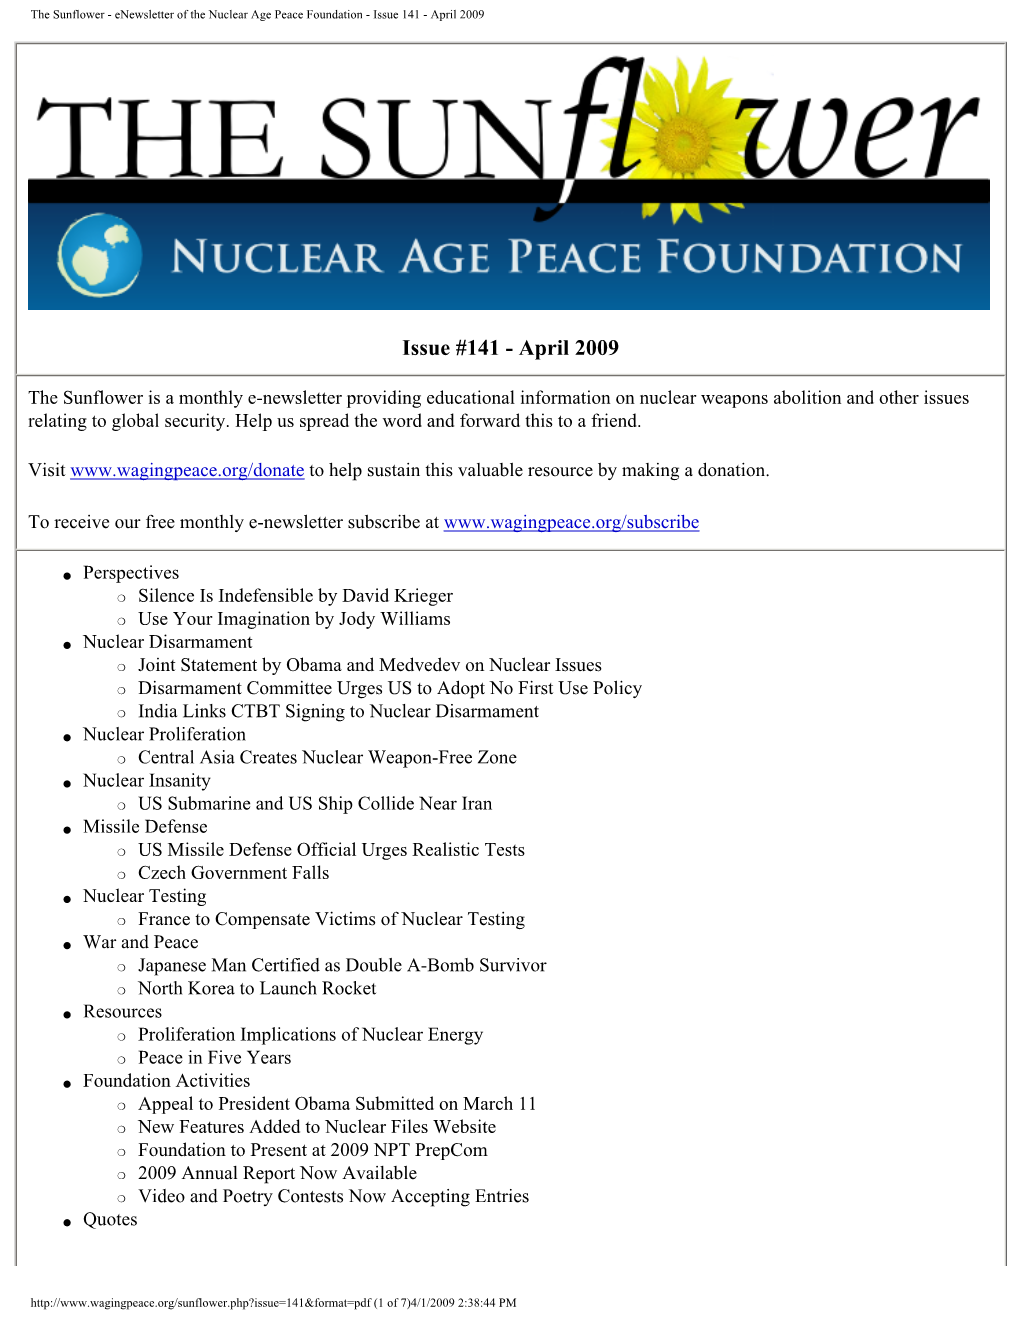 The Sunflower - Enewsletter of the Nuclear Age Peace Foundation - Issue 141 - April 2009